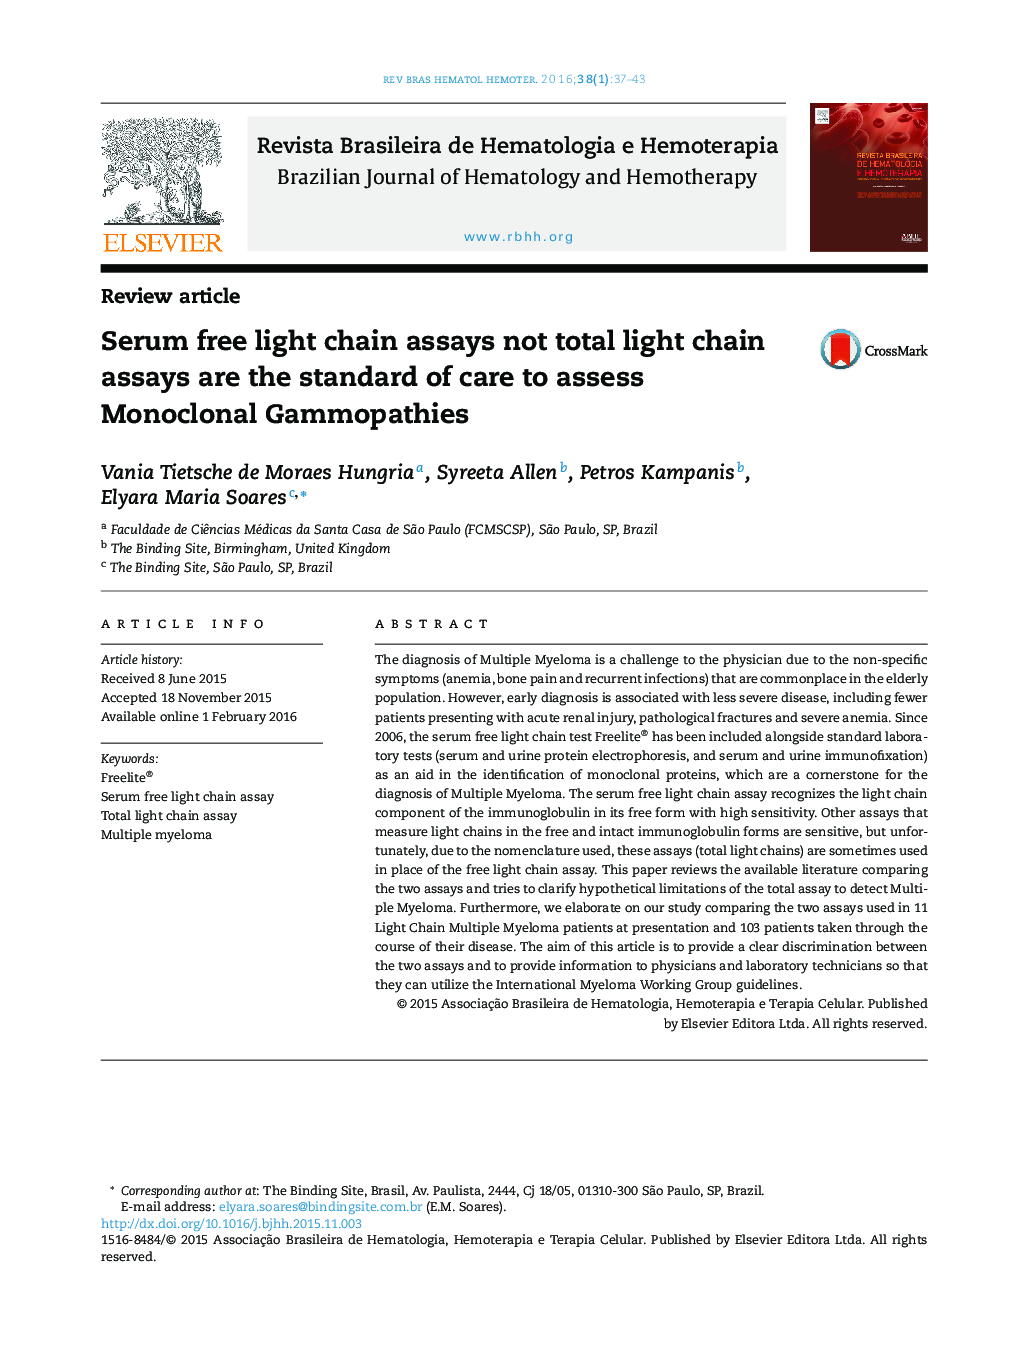 Serum free light chain assays not total light chain assays are the standard of care to assess Monoclonal Gammopathies